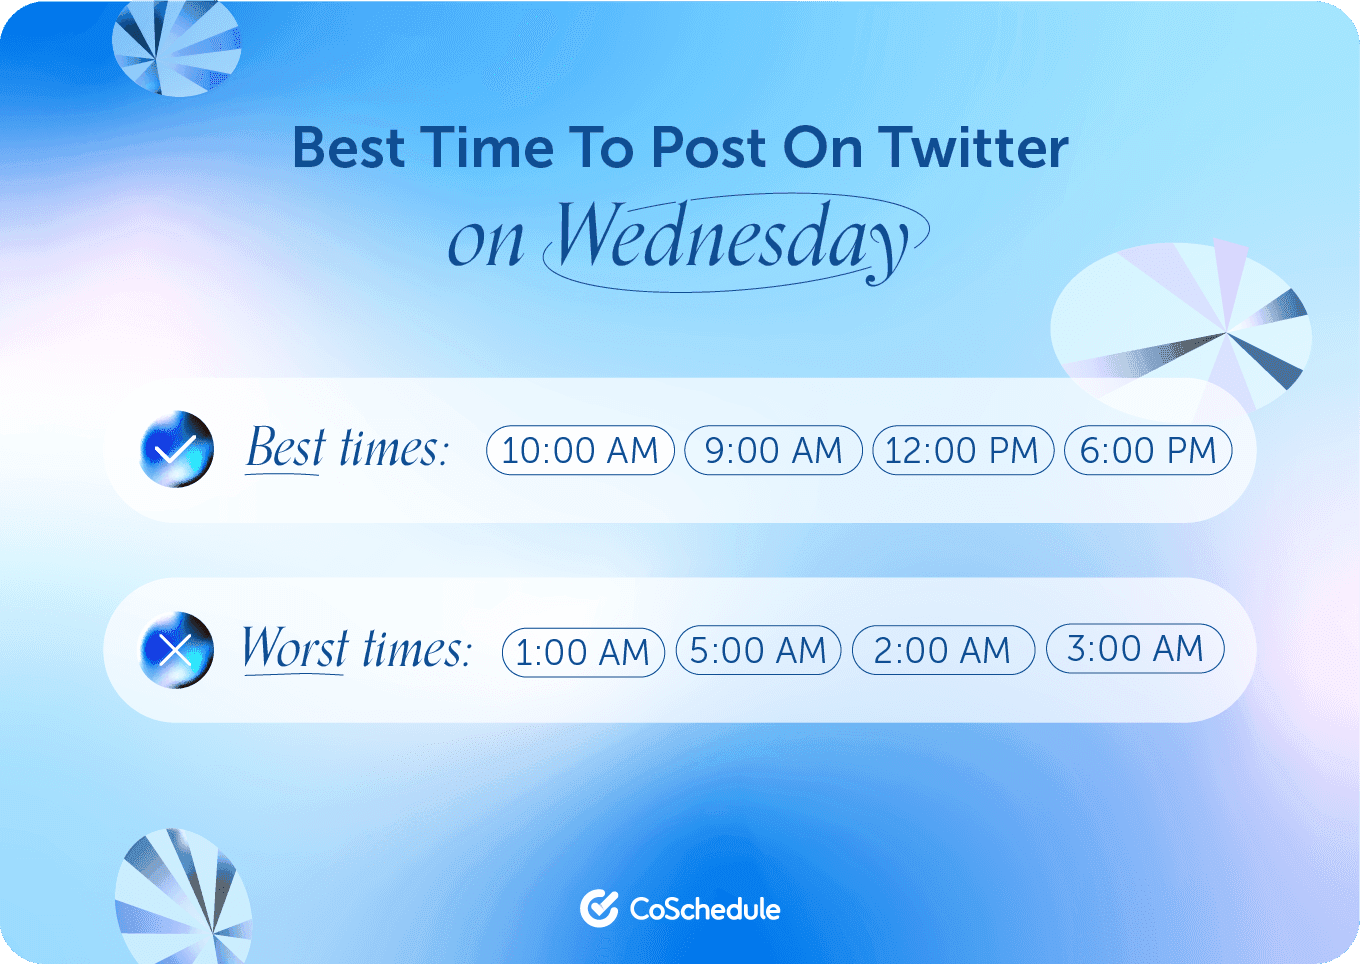 Coschedule graphic on the best times to post to Twitter on Wednesday